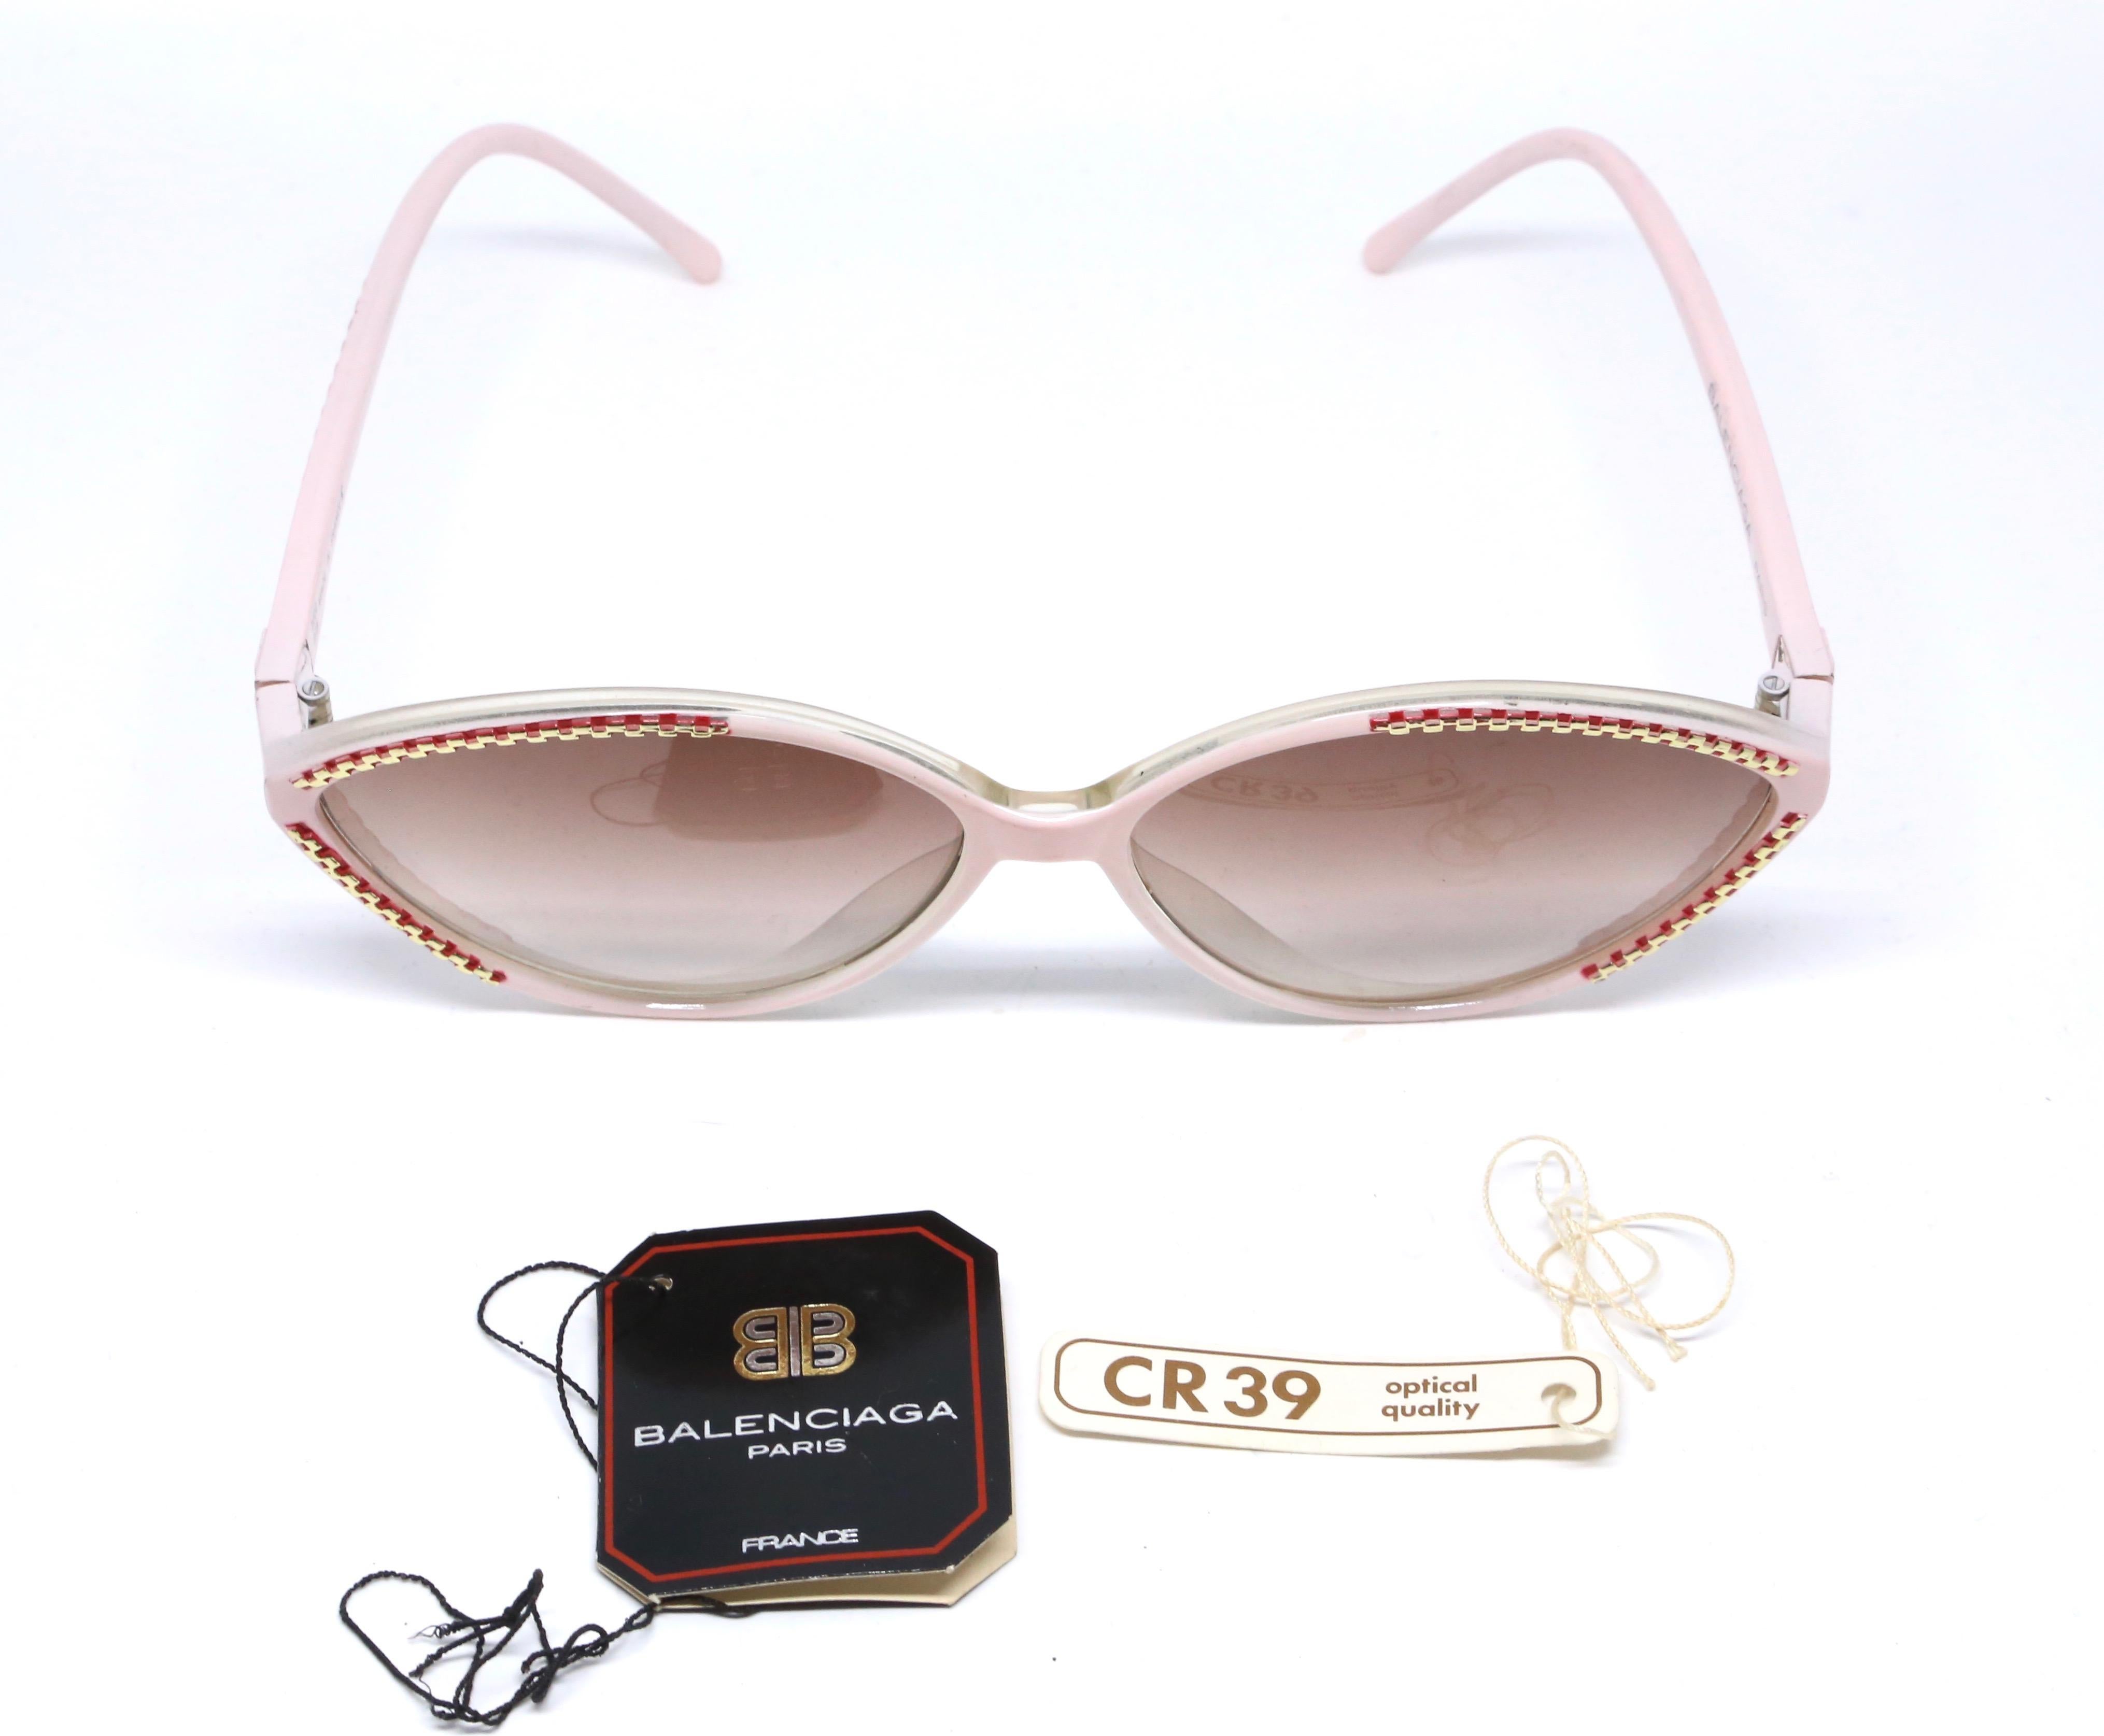 1980's BALENCIAGA pink and burgundy plastic sunglasses with gold accents 1